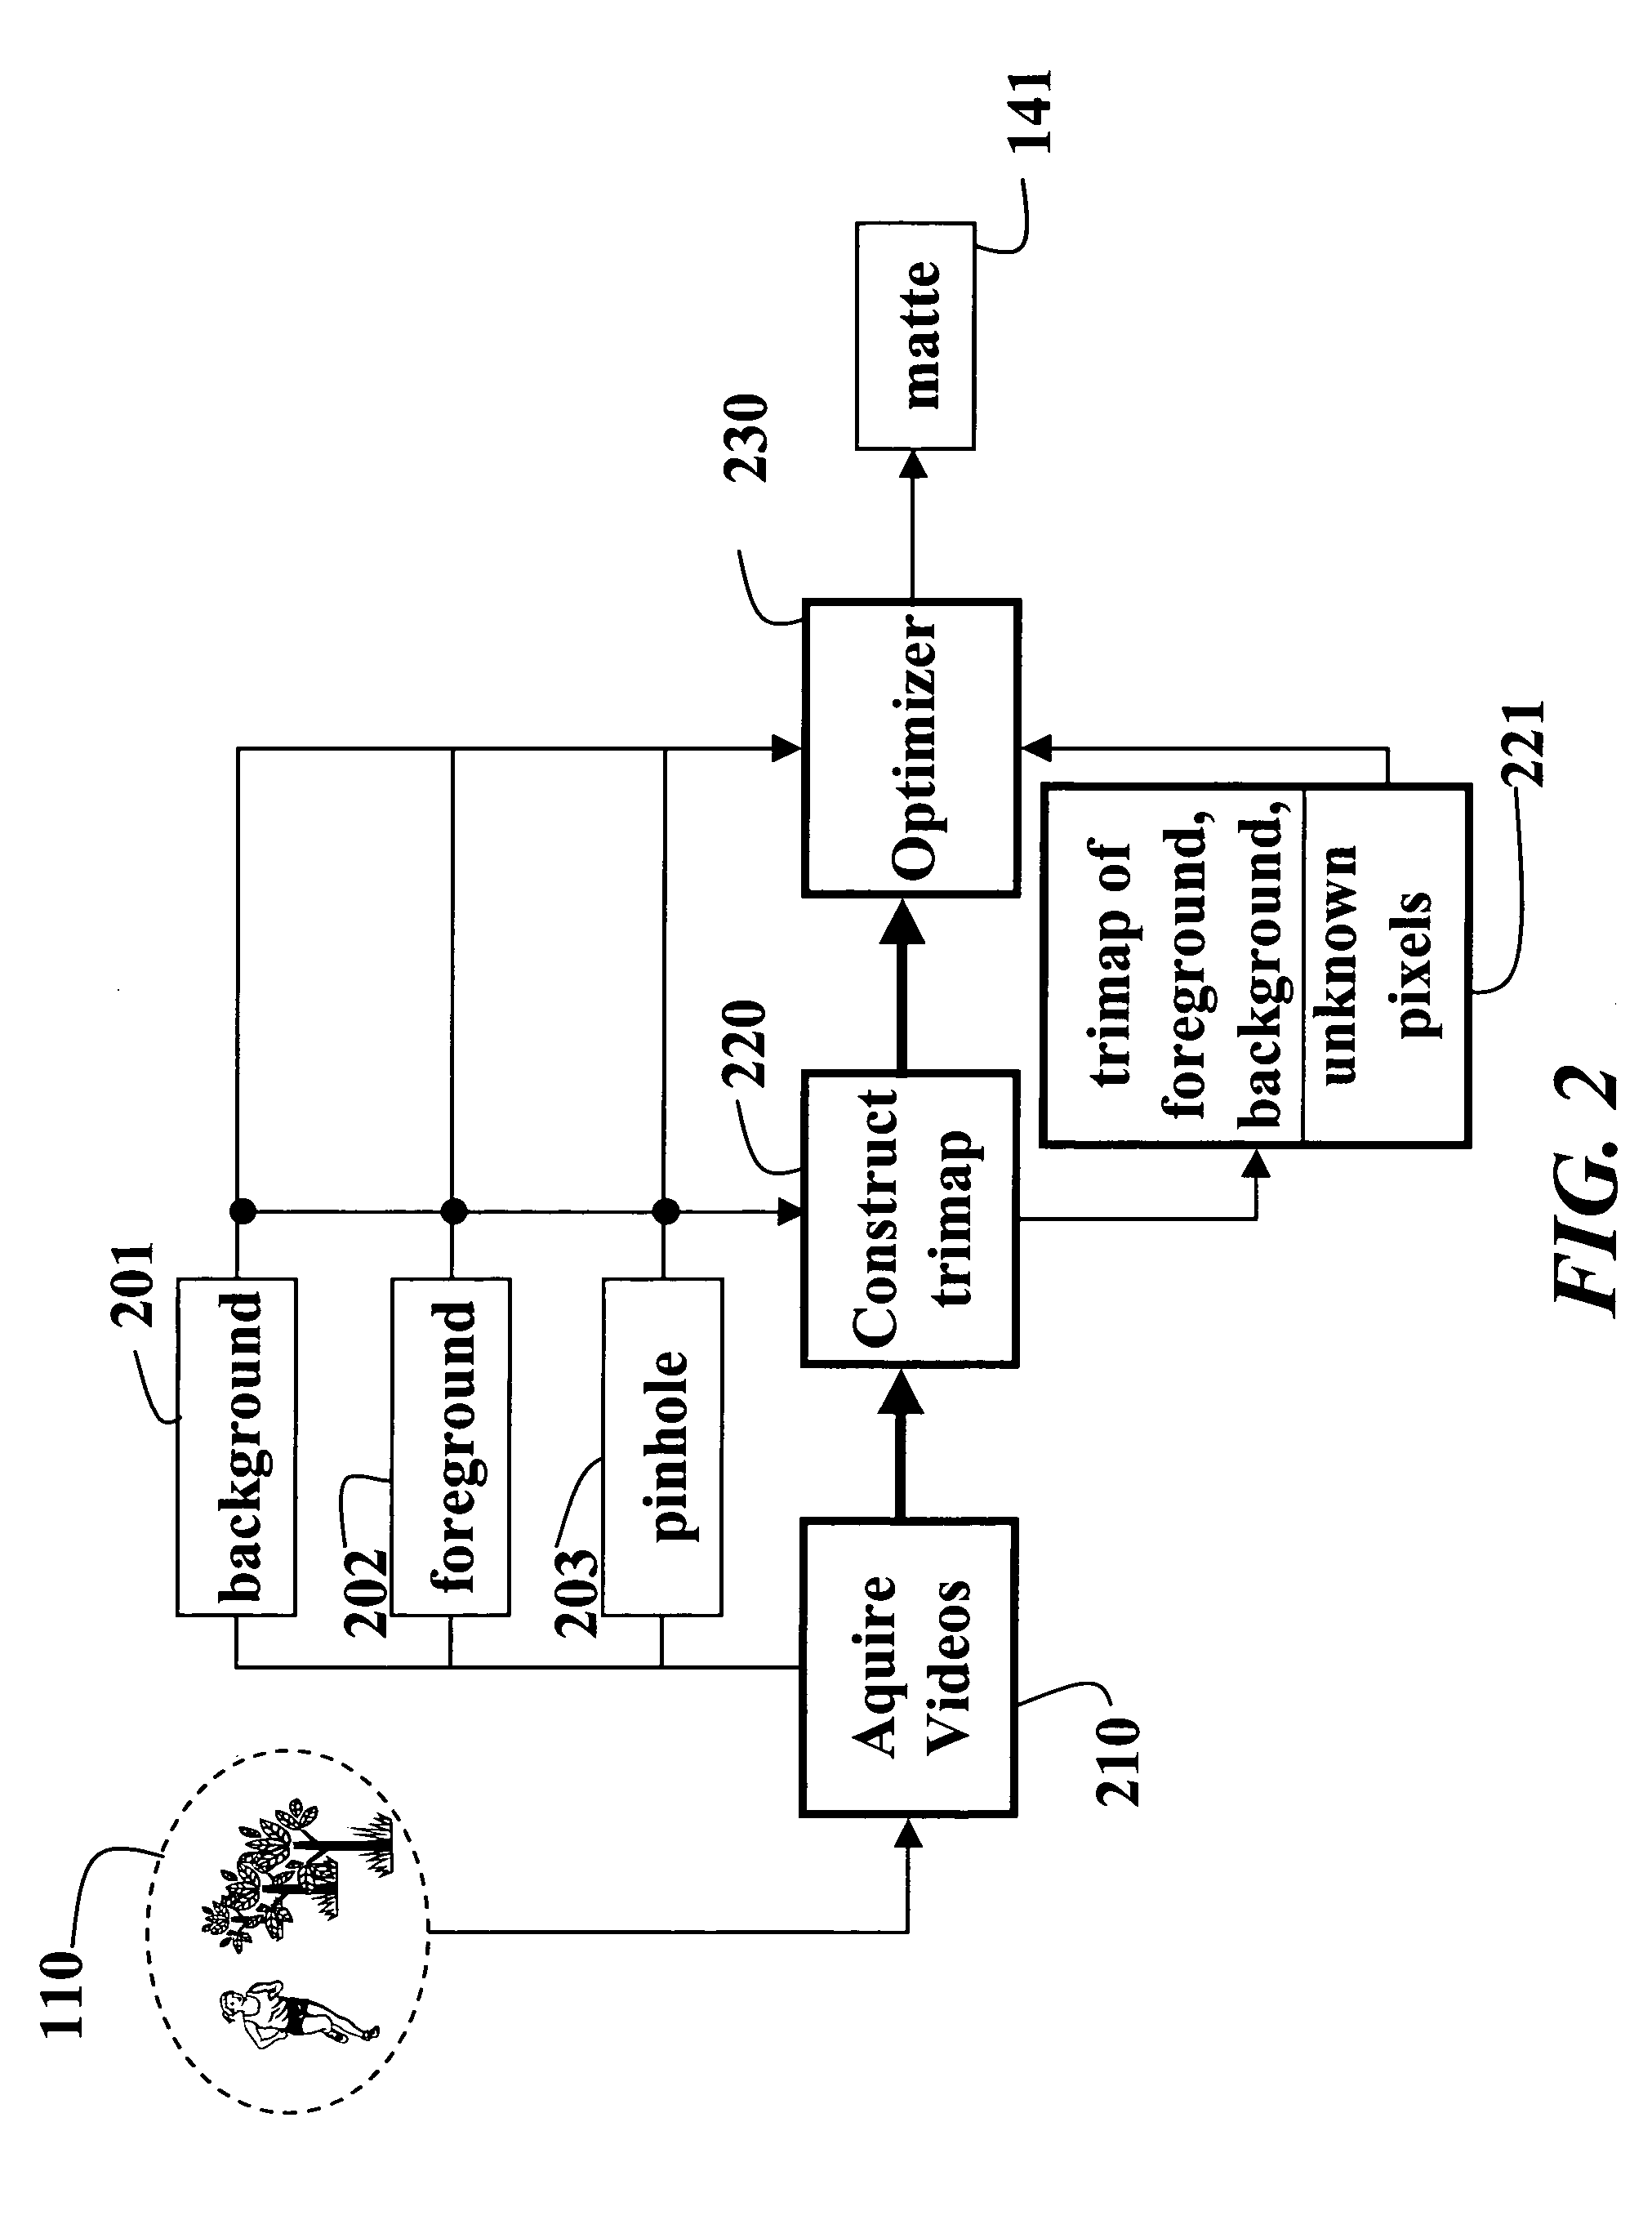 System and method for image matting